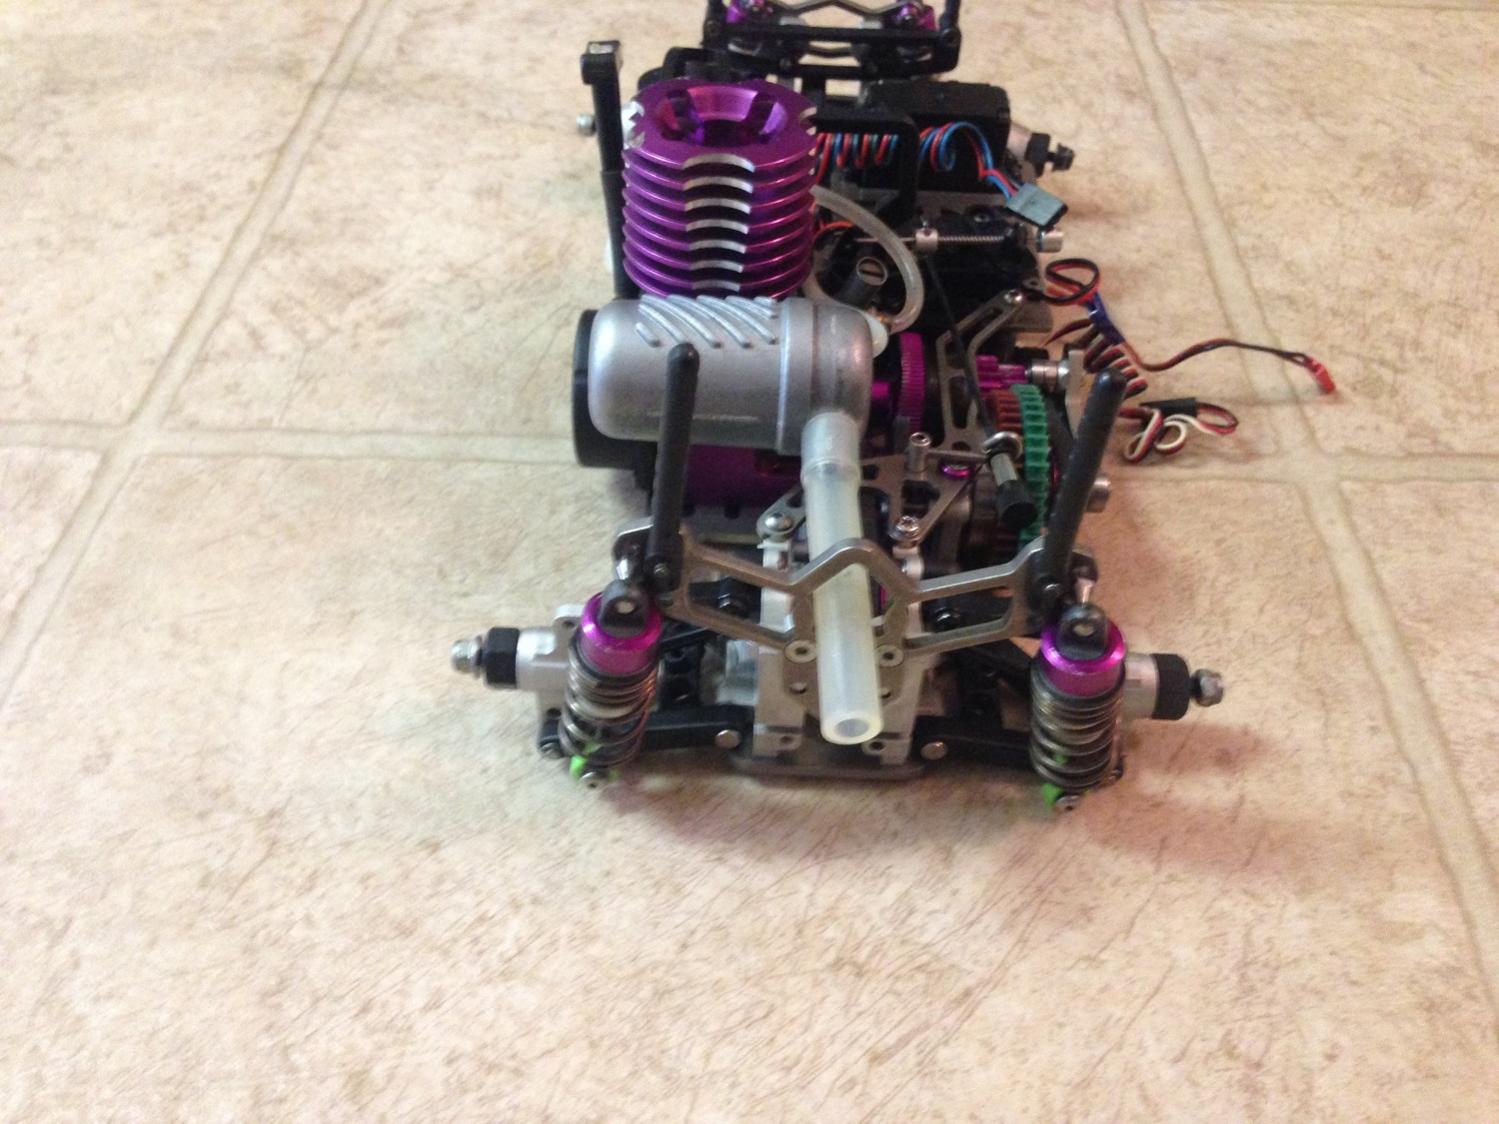 Hpi nitro rs4 mini what chassis is this? - R/C Tech Forums